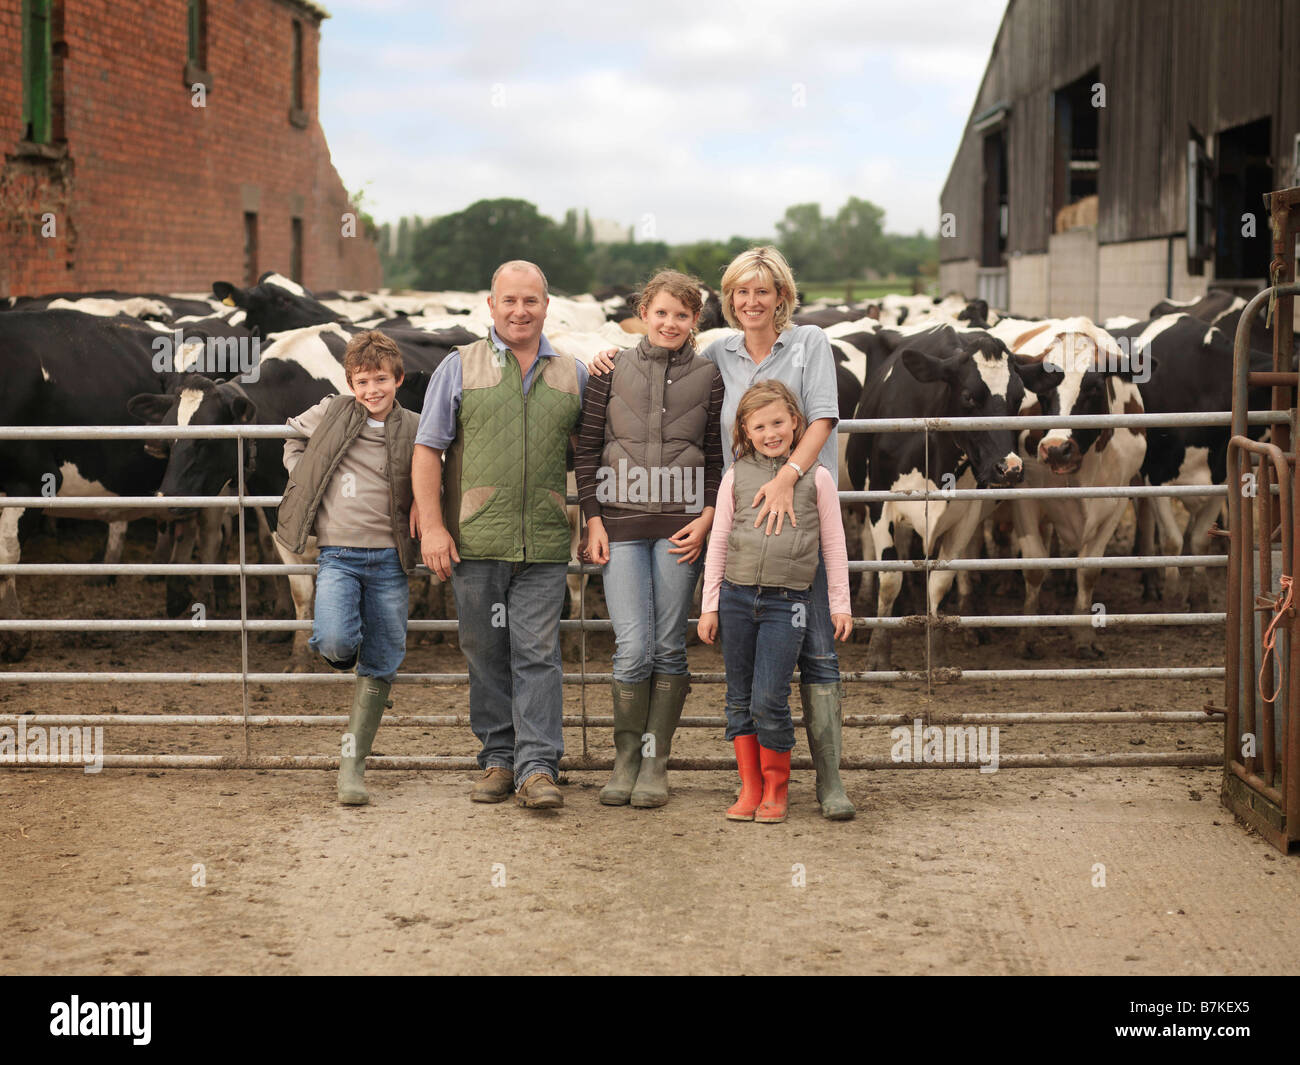 Farmer And Family With Cows Stock Photo